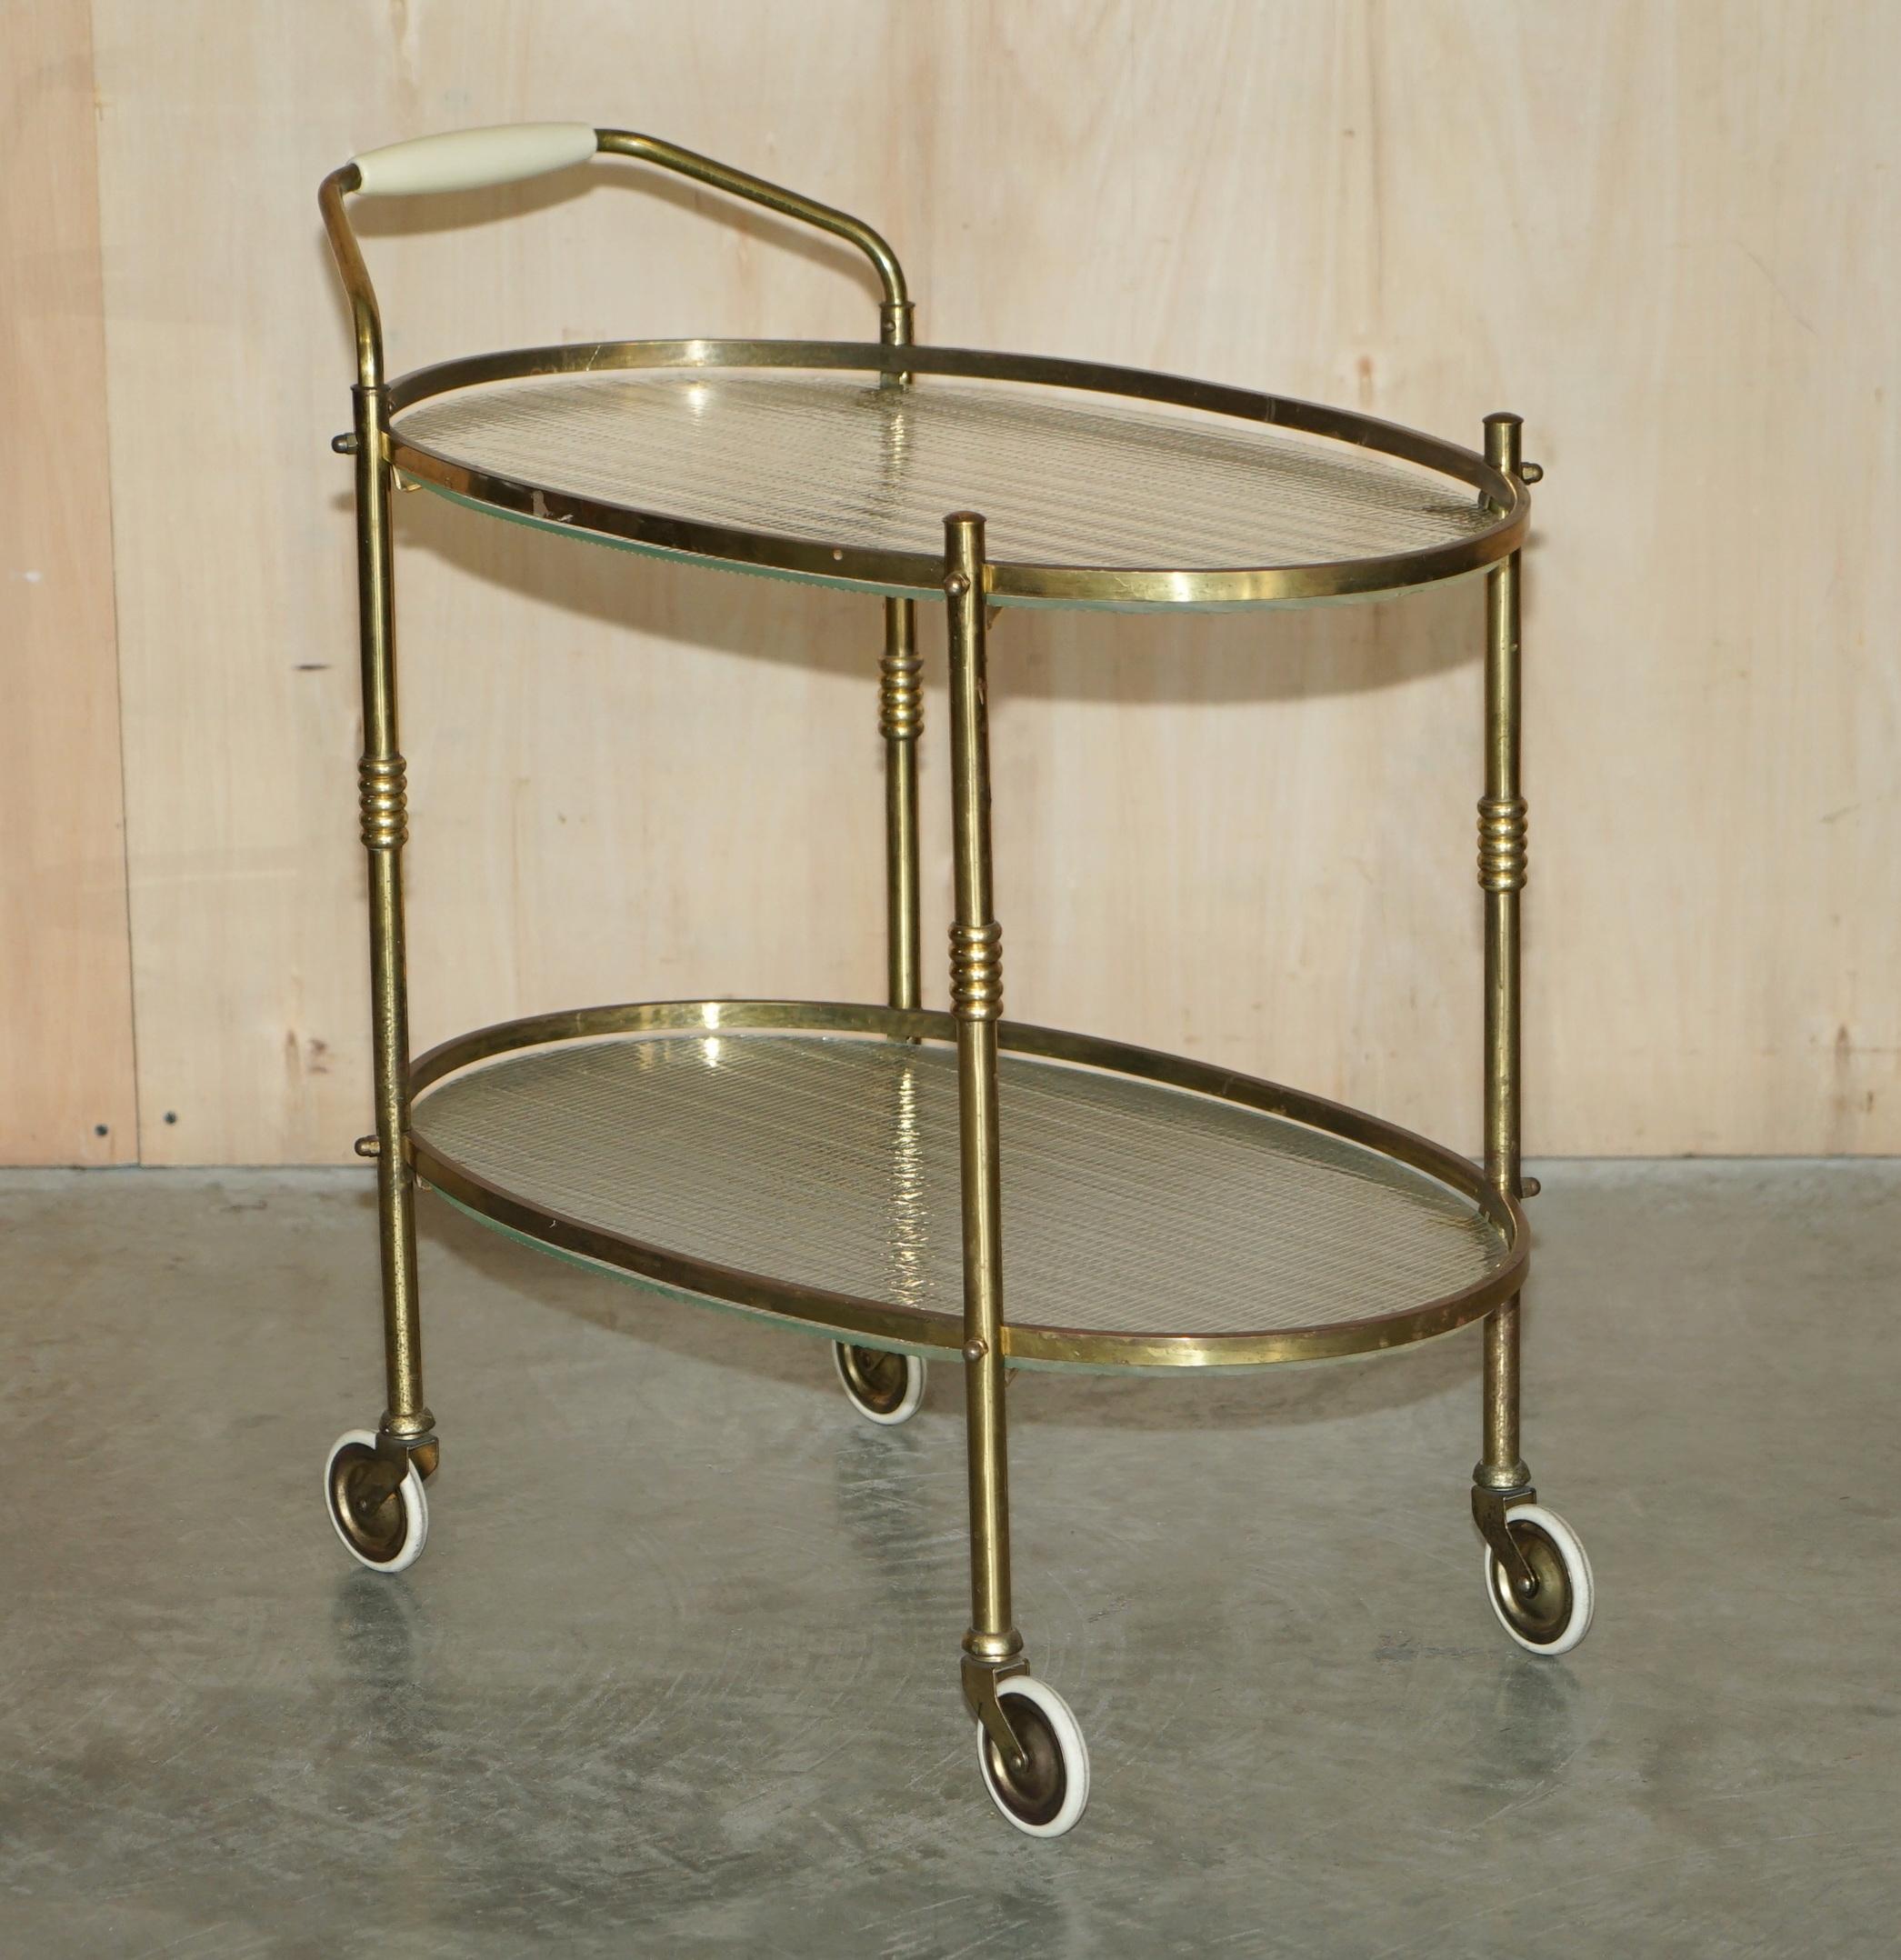 We are delighted to offer for sale this Art Deco circa 1920's brass and frosted glass drinks trolley circa 1920

A good looking well made and decorative drinks serving trolley, the glass is frosted and the frame is light polished brass 

The